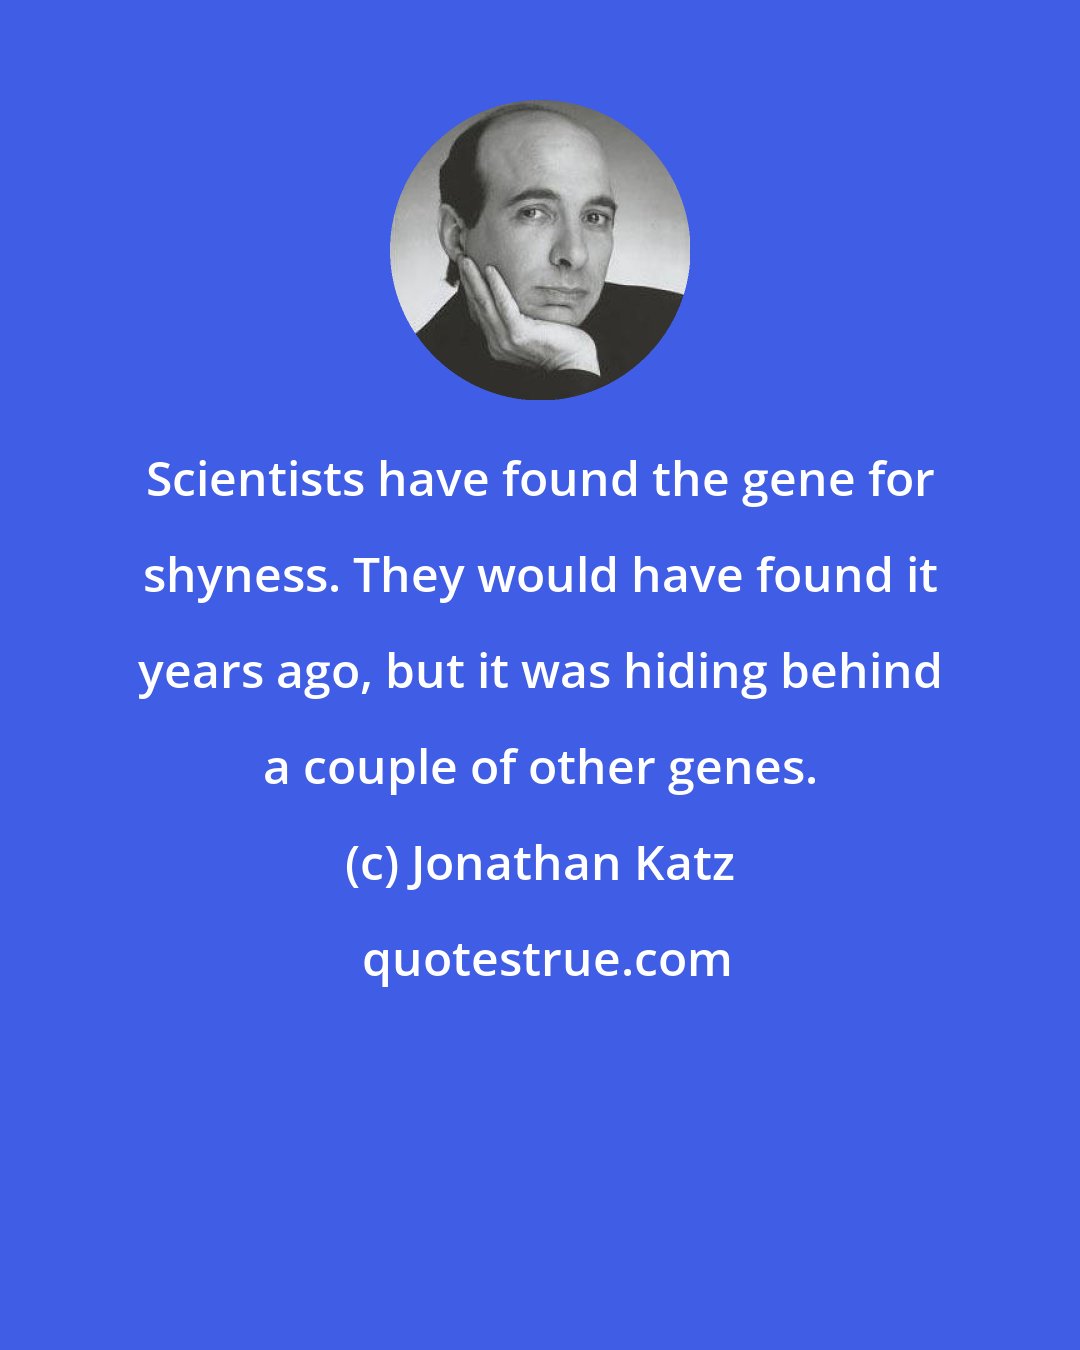 Jonathan Katz: Scientists have found the gene for shyness. They would have found it years ago, but it was hiding behind a couple of other genes.